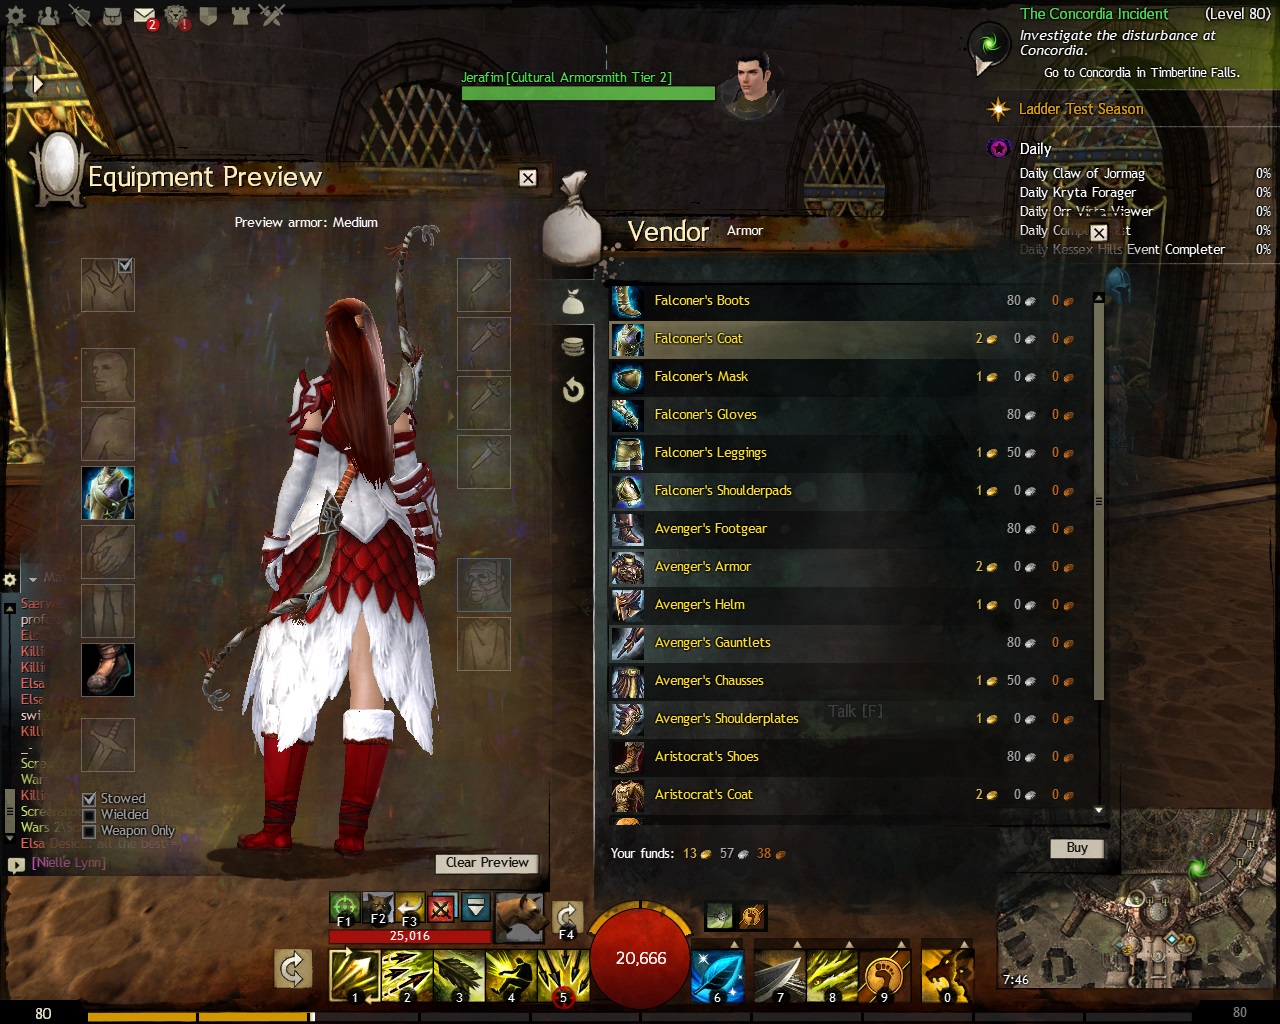 Guild Wars 2 - Falconer's Coat with Skirt and Seeker Boots - 02 - Back